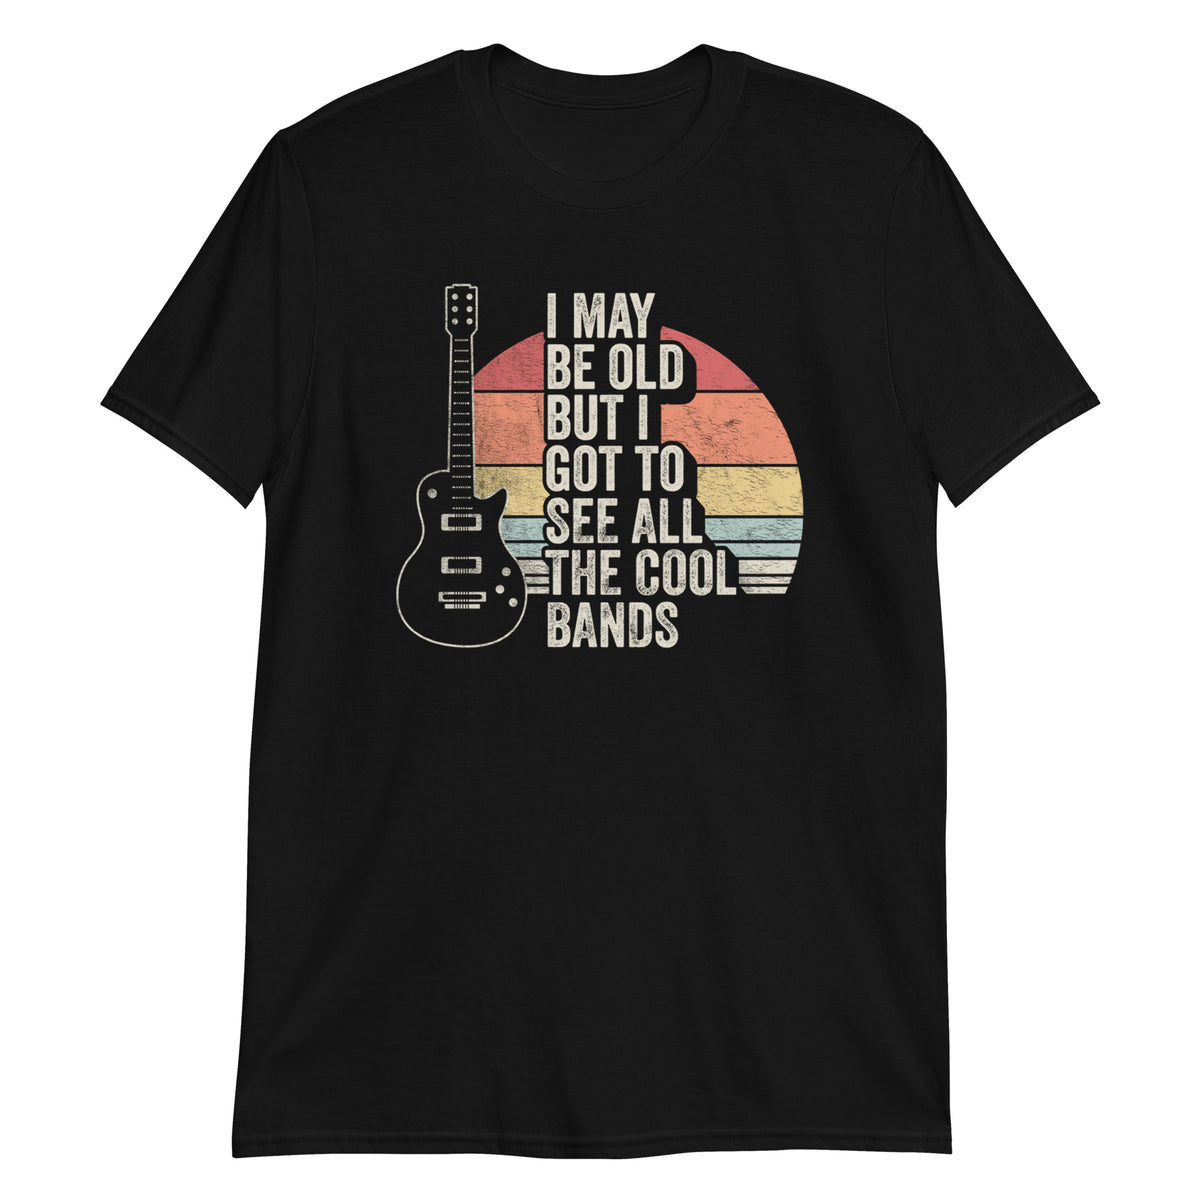 I May Be Old But I Got to See All The Cool Bands T-Shirt